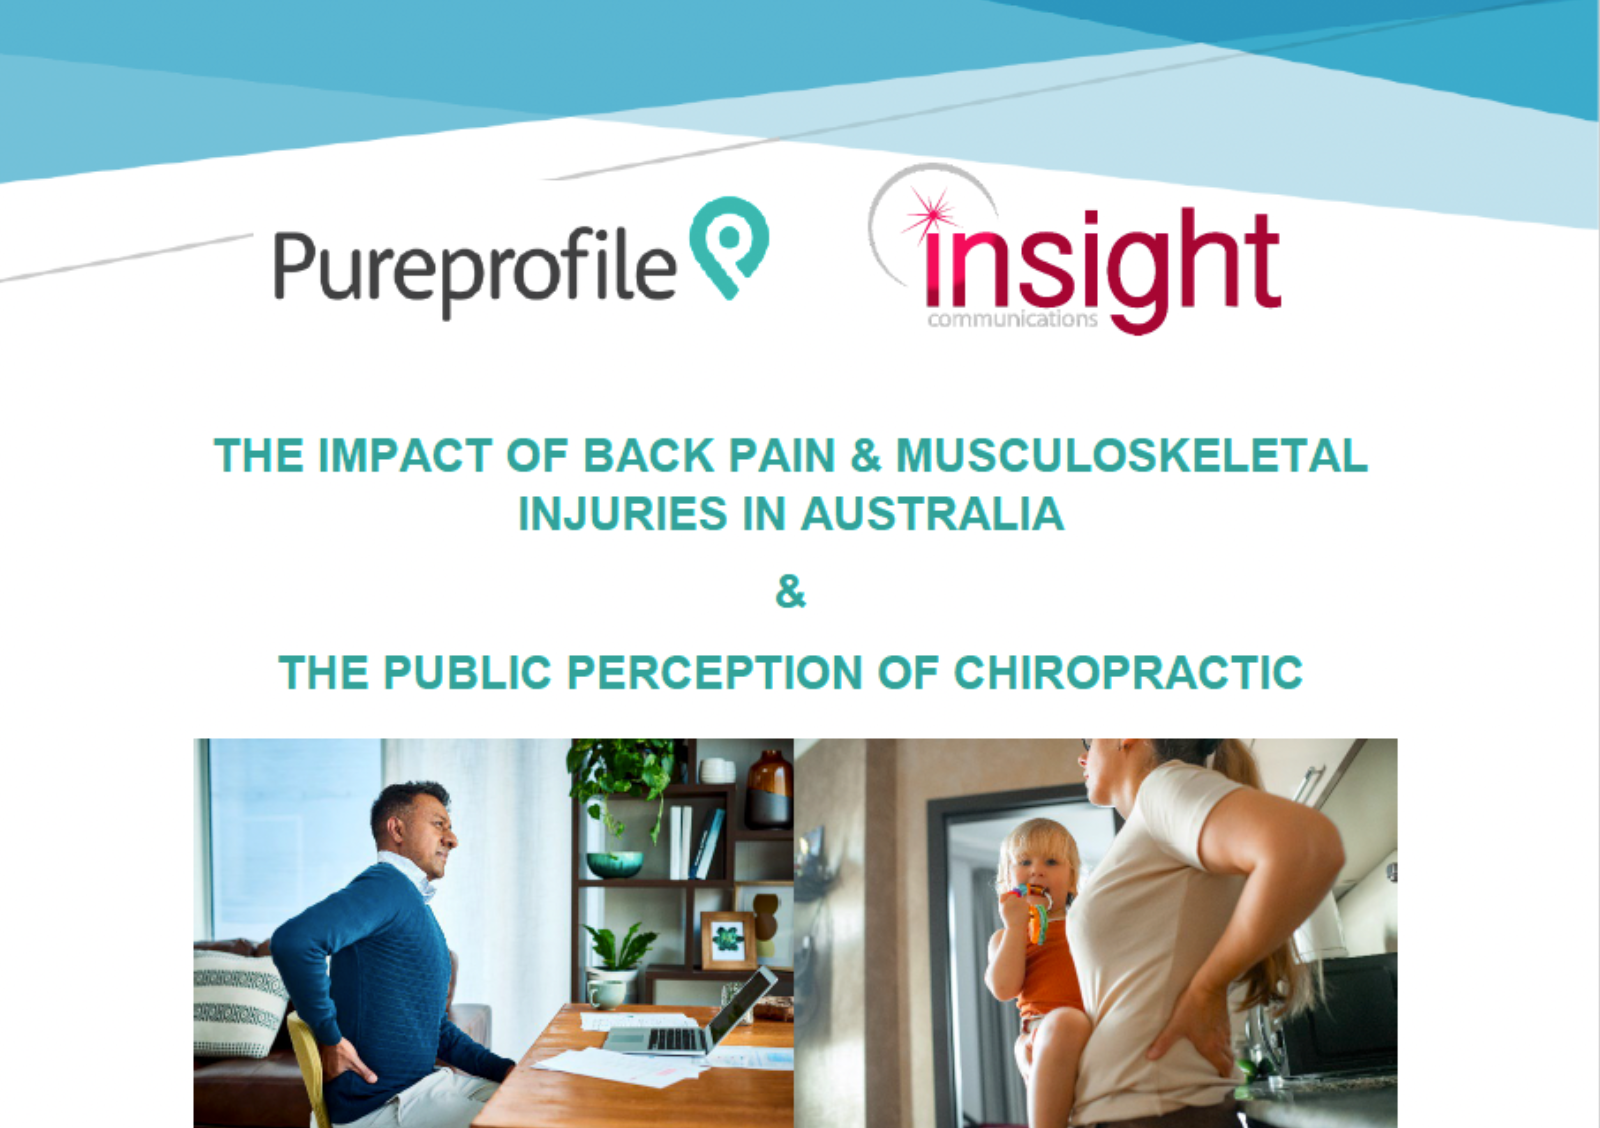 The impact of back pain in Australia report